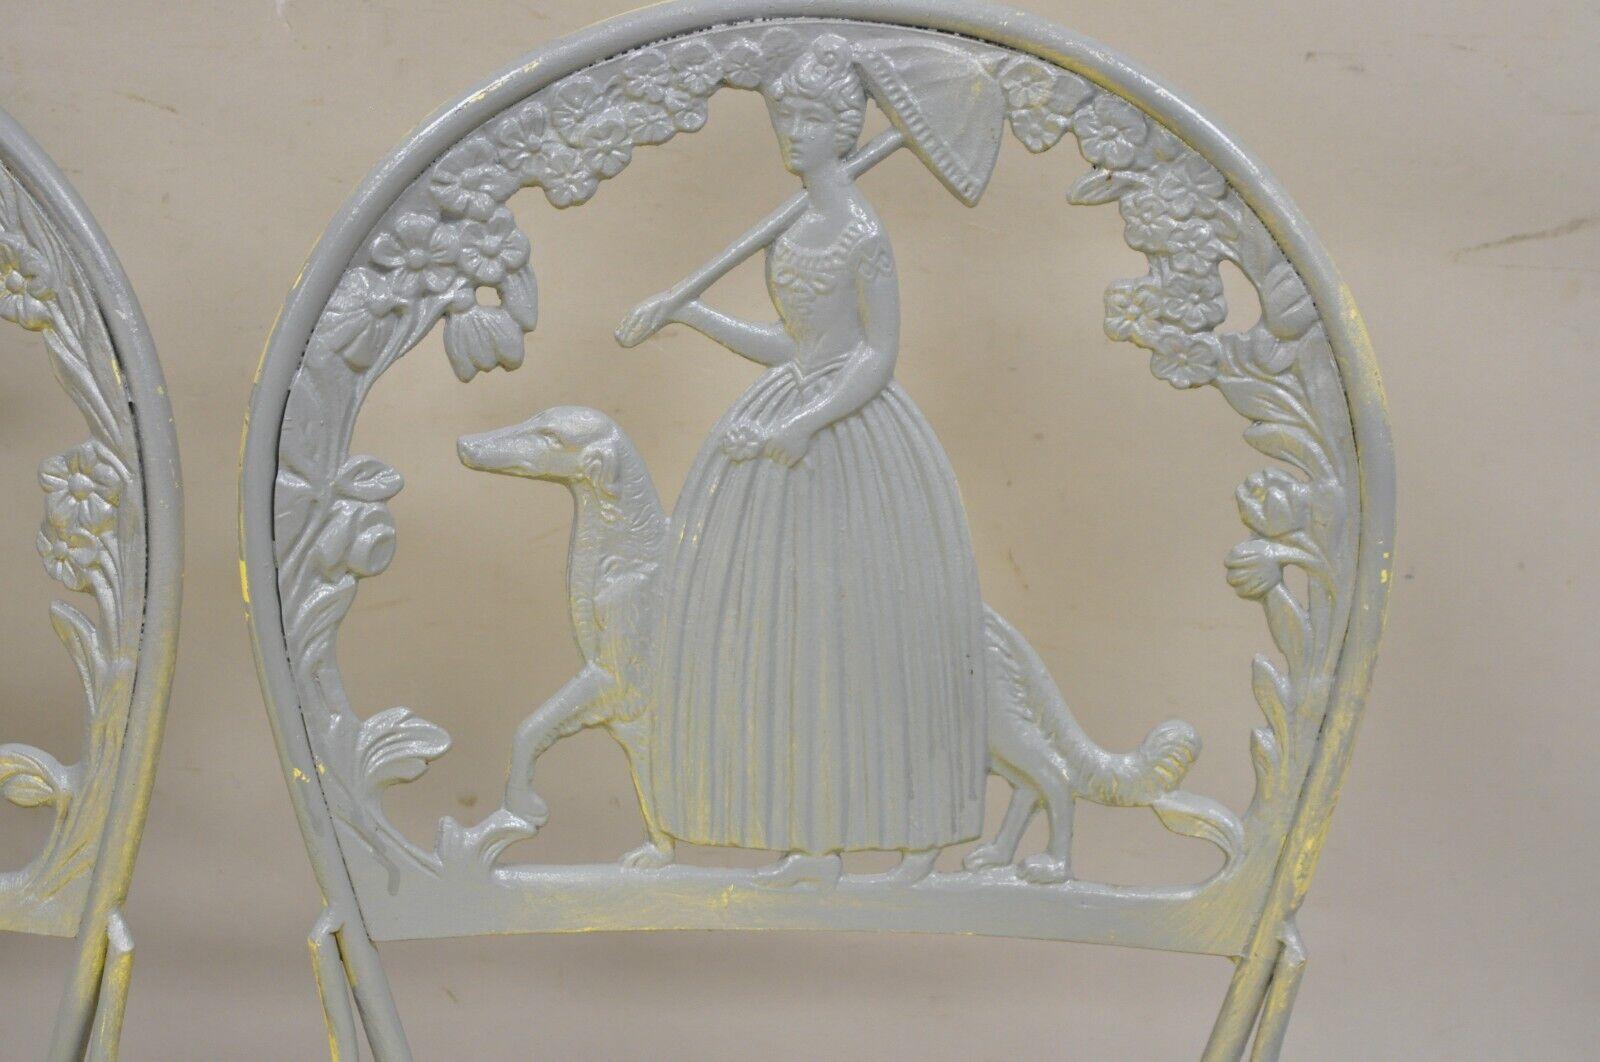 20th Century Victorian Style Cast Aluminum Courting Scene Garden Patio Bistro Chairs - a Pair For Sale